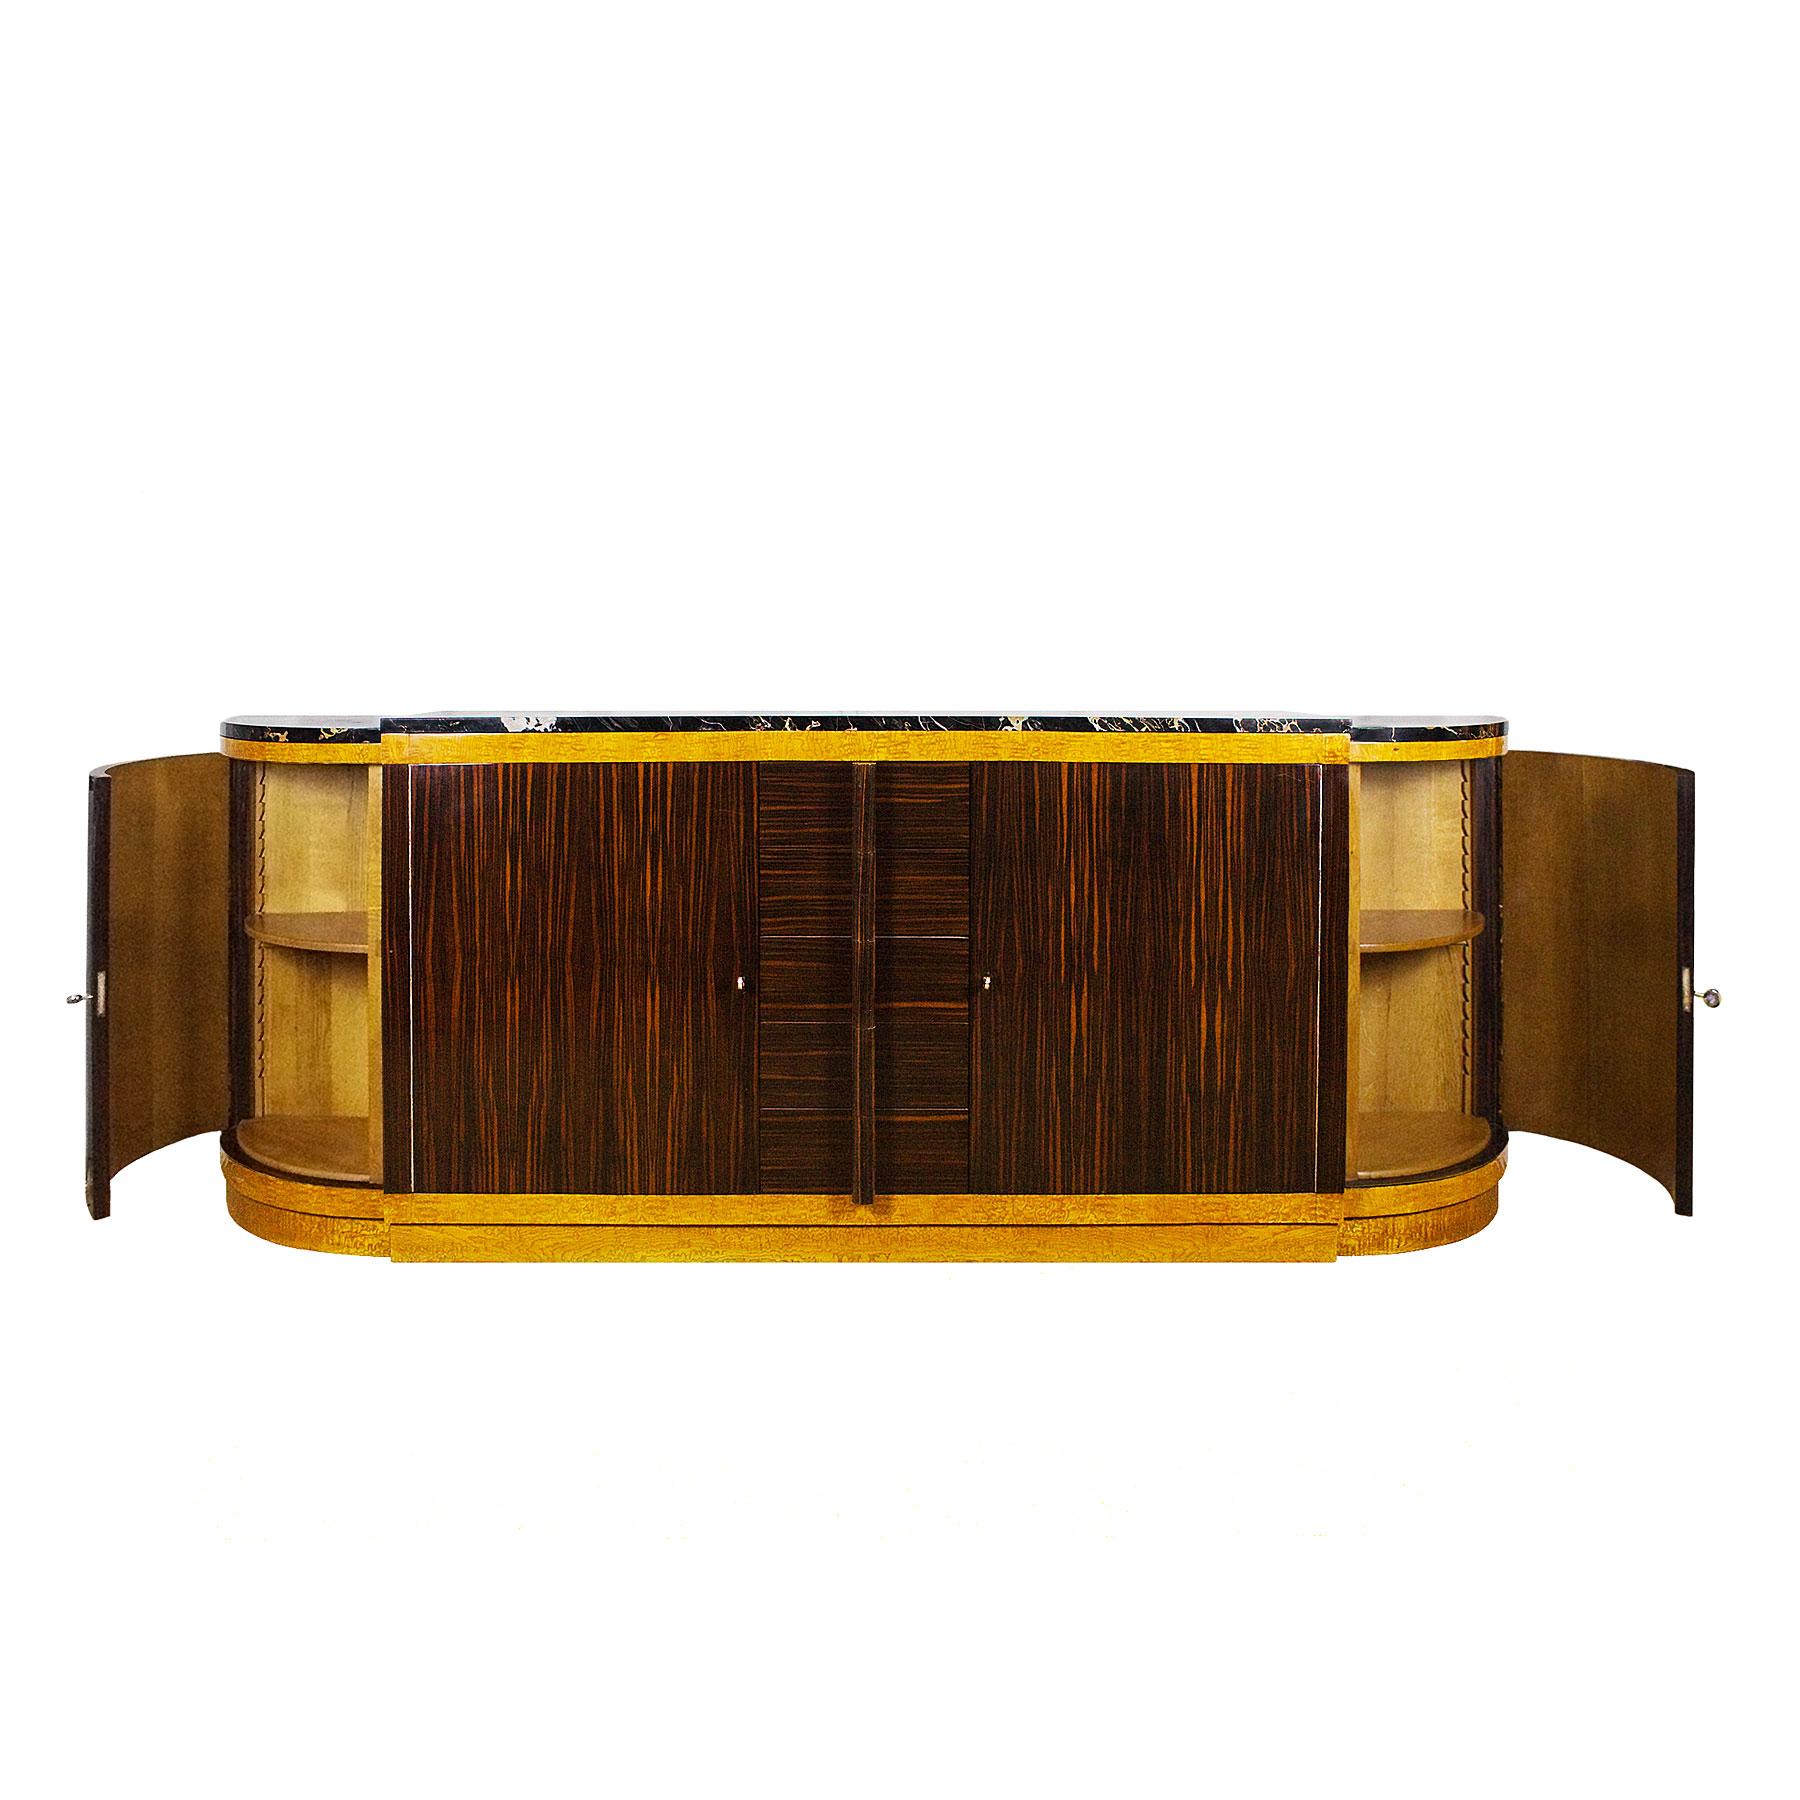 Rounded Art Deco Sideboard by Jean Fauré, Macassar Ebony - France, 1930s In Good Condition For Sale In Girona, ES